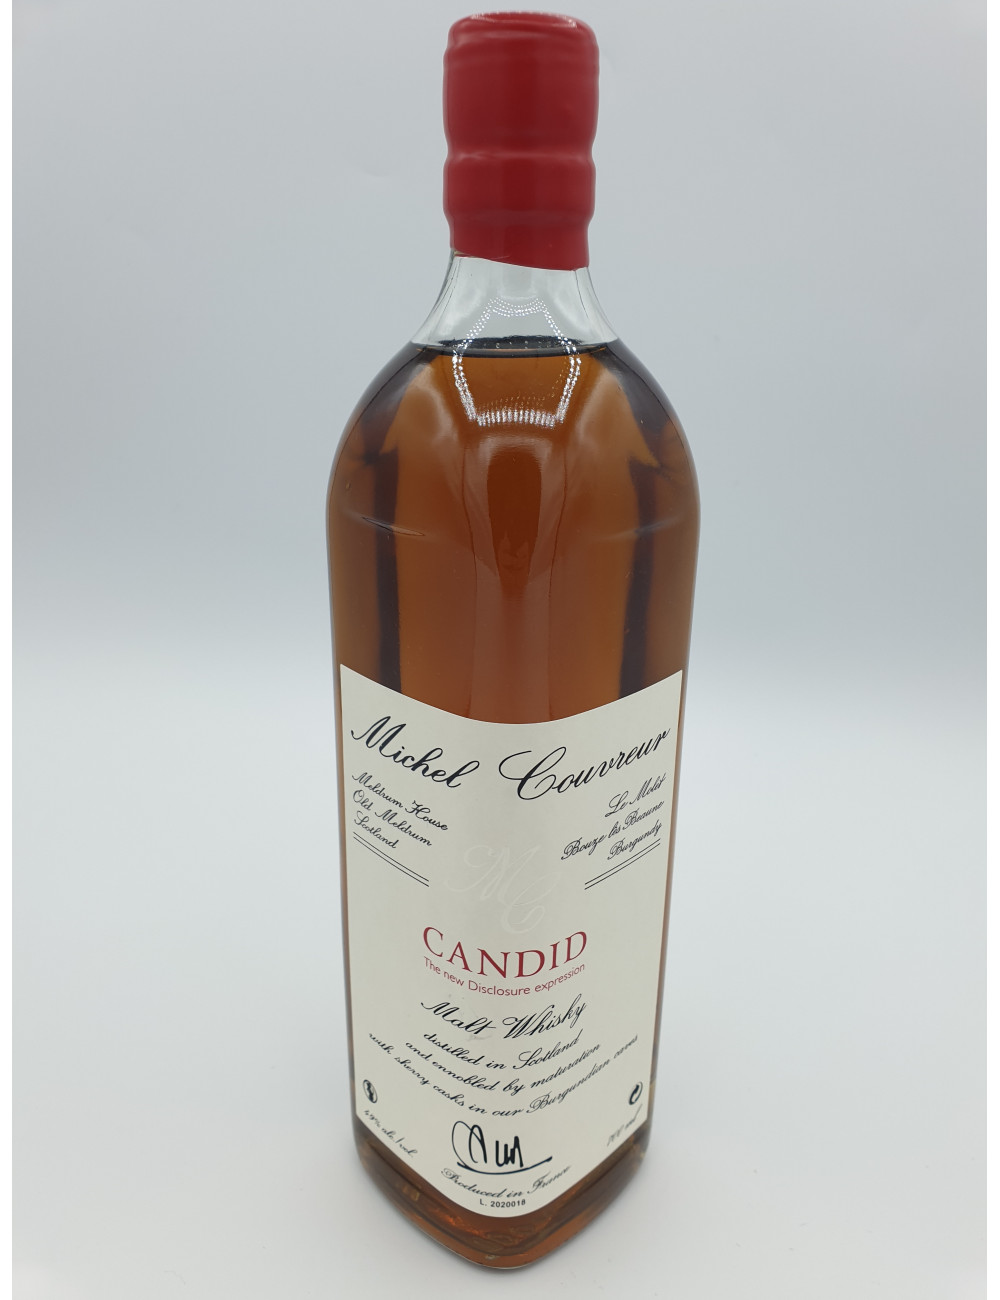 CANDID MALT WHISKY  49°  M. COUVREUR